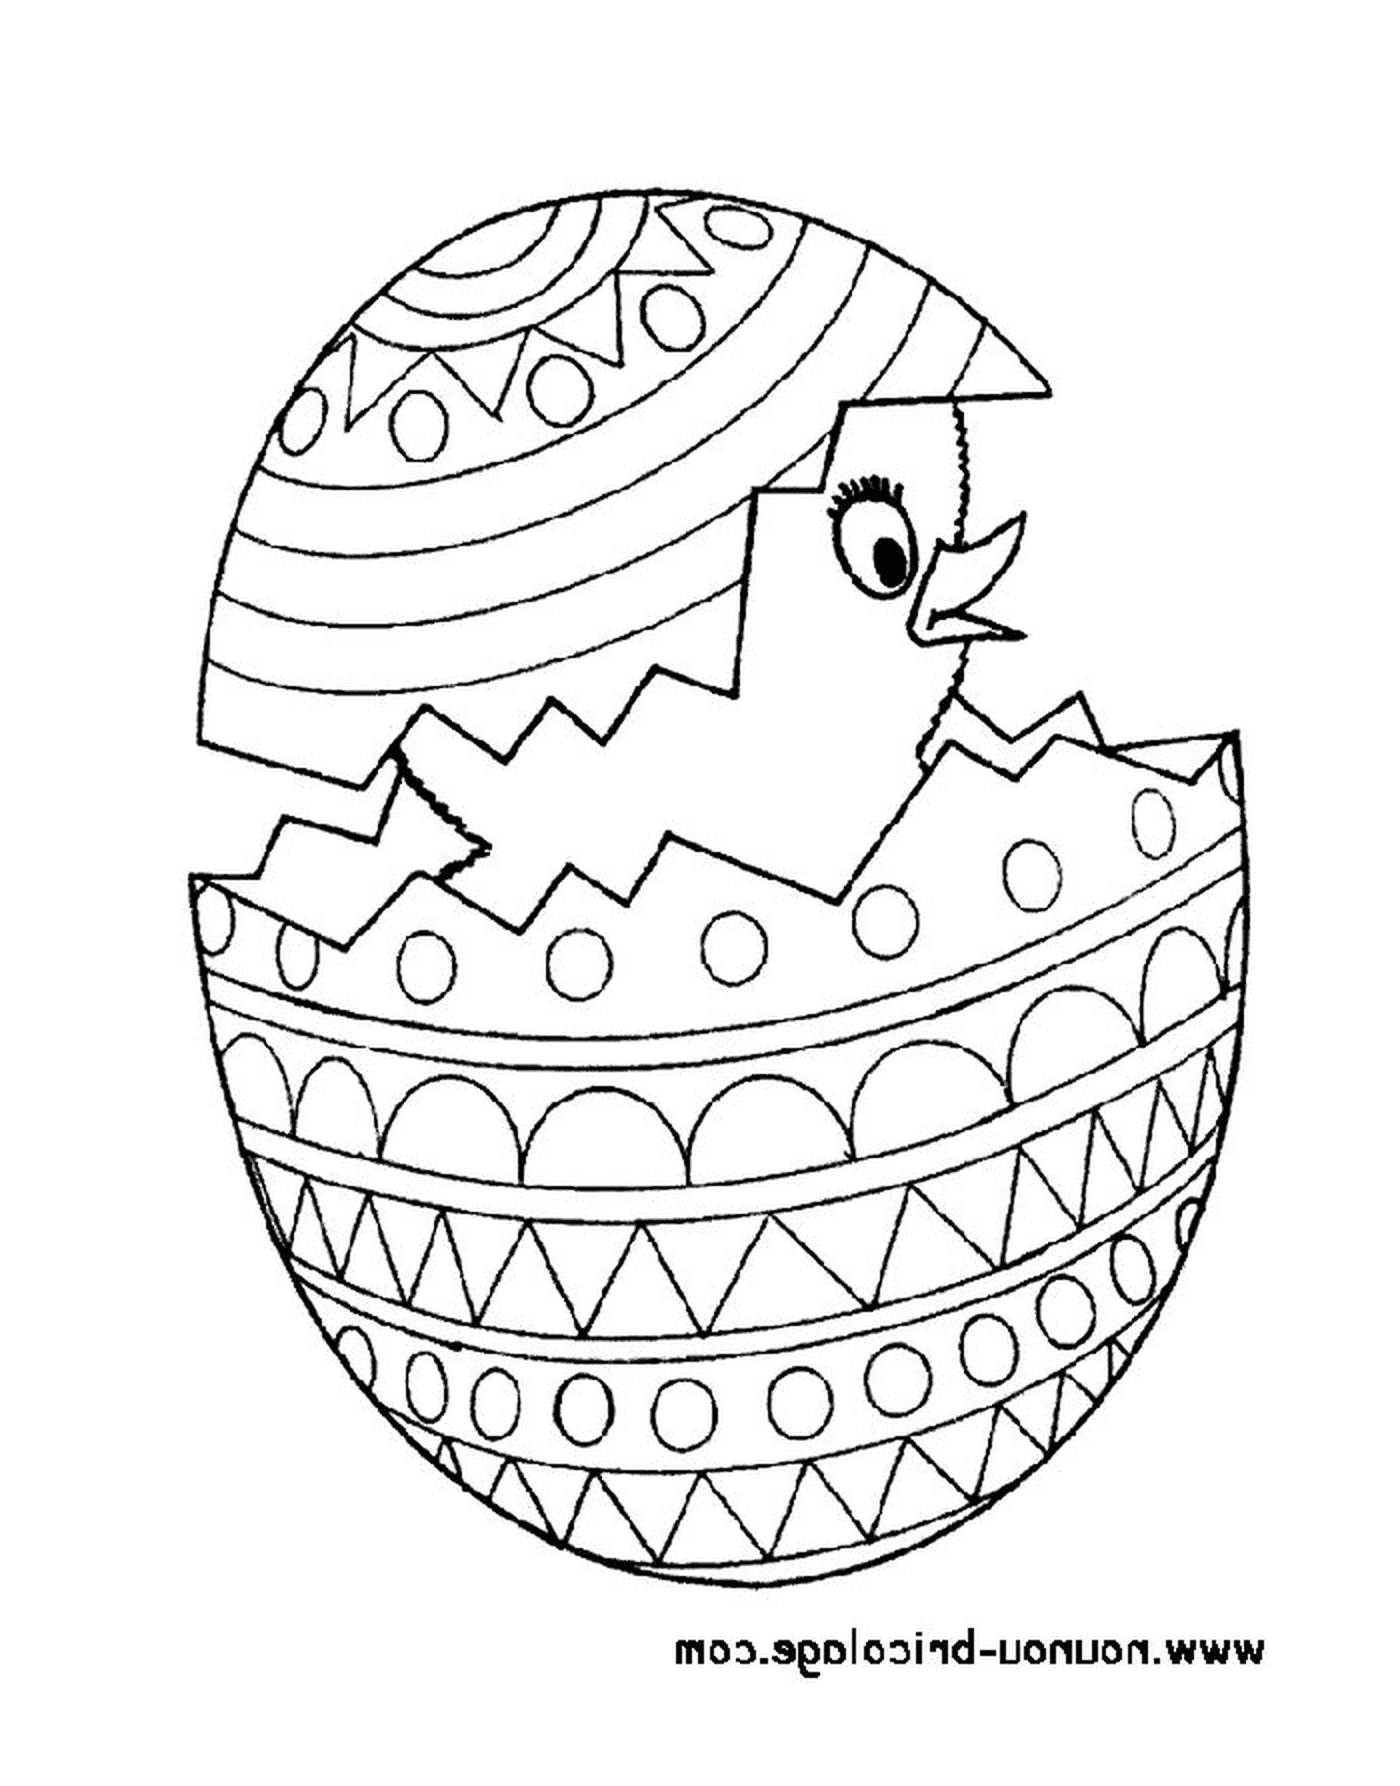  Easter 48, an Easter egg with a chick inside 